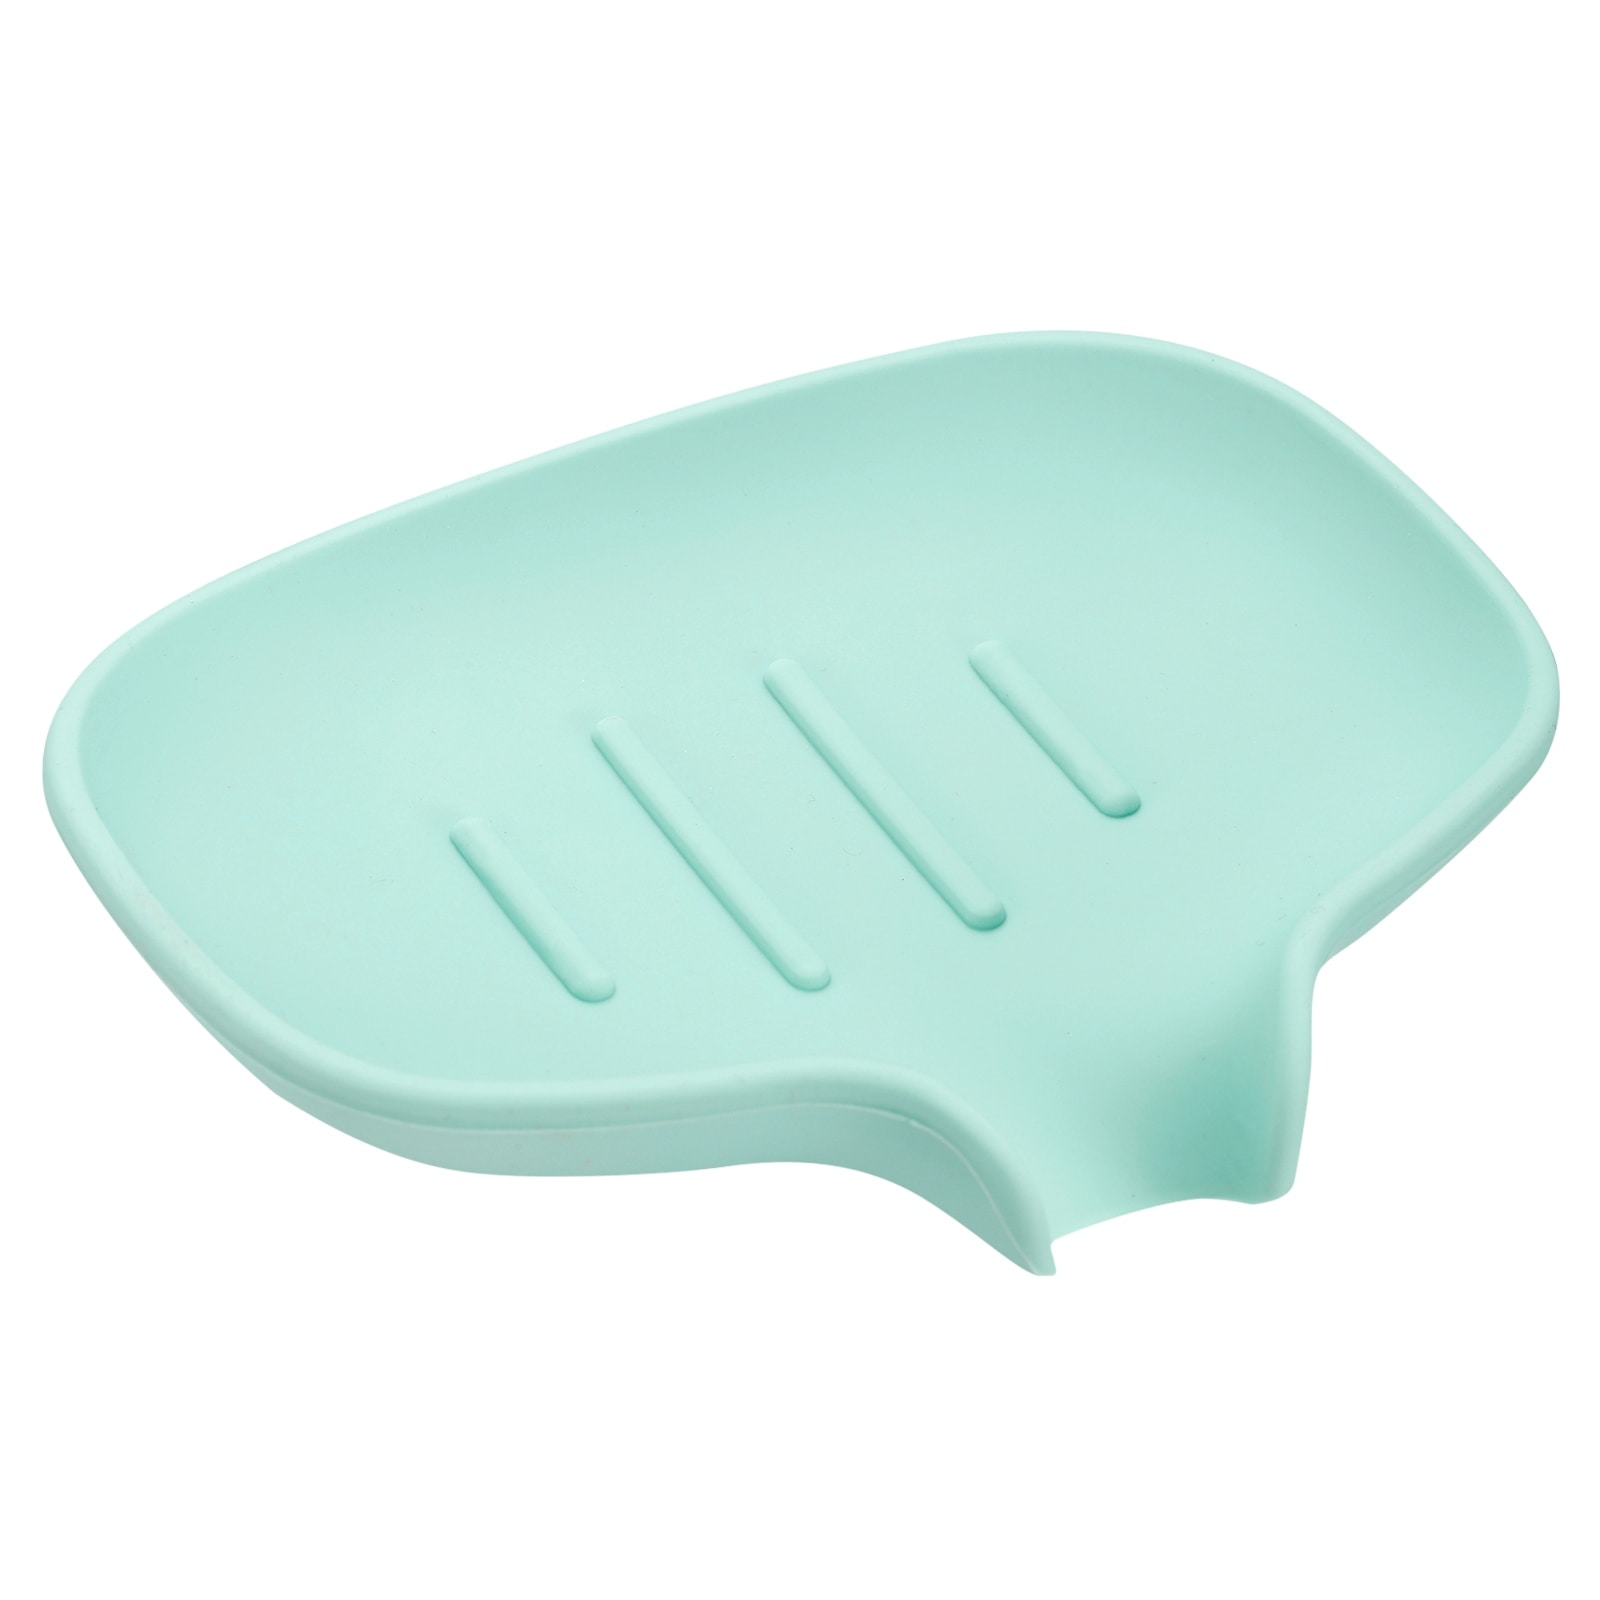 https://ak1.ostkcdn.com/images/products/is/images/direct/9953257a546ad3691c30d72cbb80e5e054d6b67c/Soap-Dish-with-Drain-Tray%2C-Silicone-Self-Draining-Waterfall-Soap-Saver.jpg